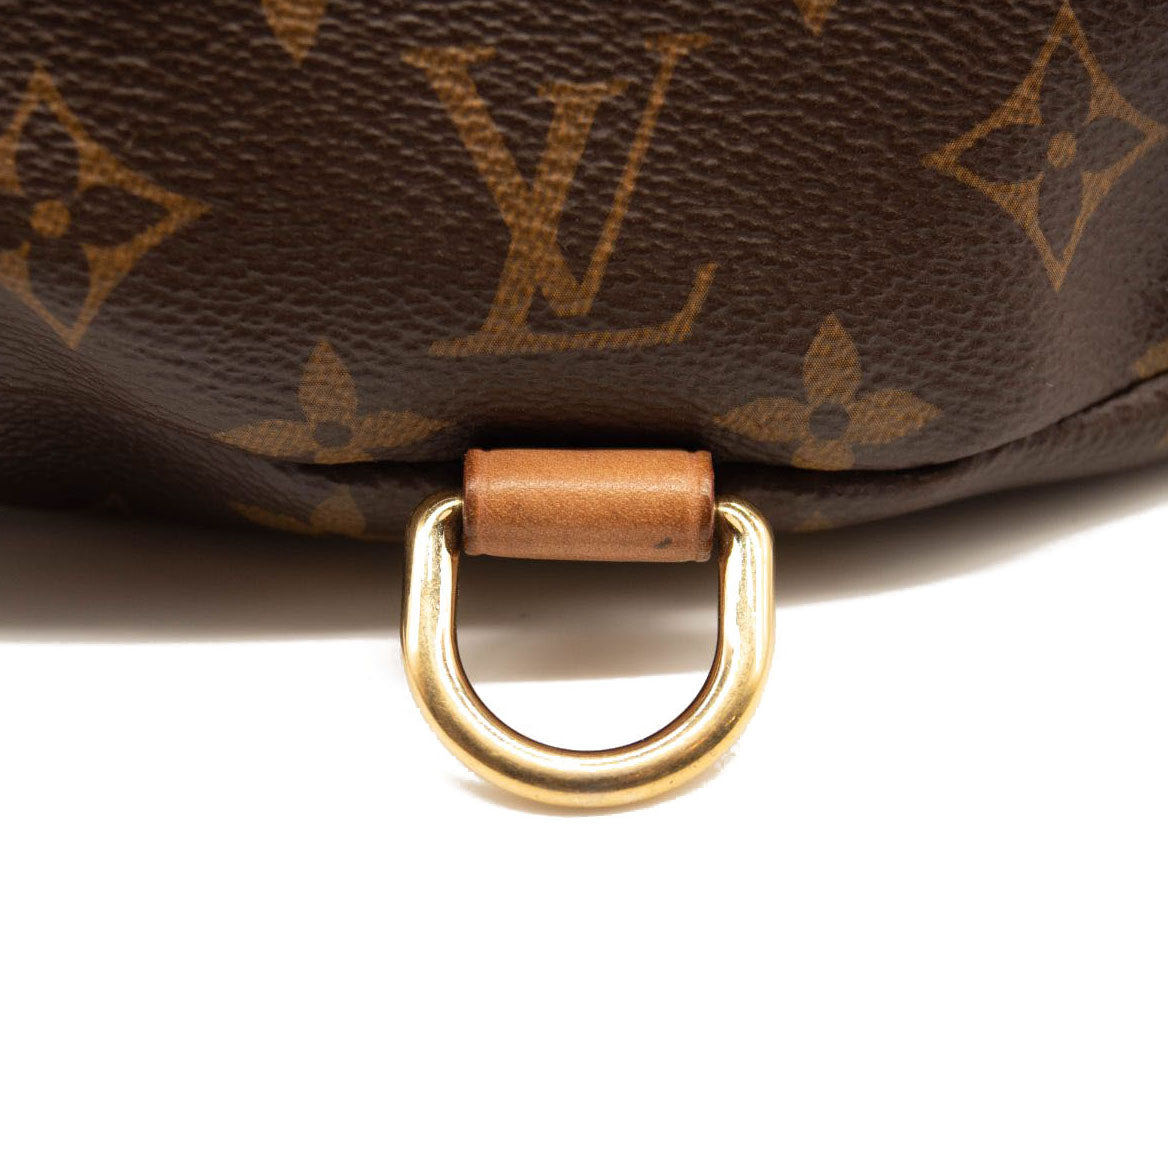 Used Louis Vuitton Bags On Sale